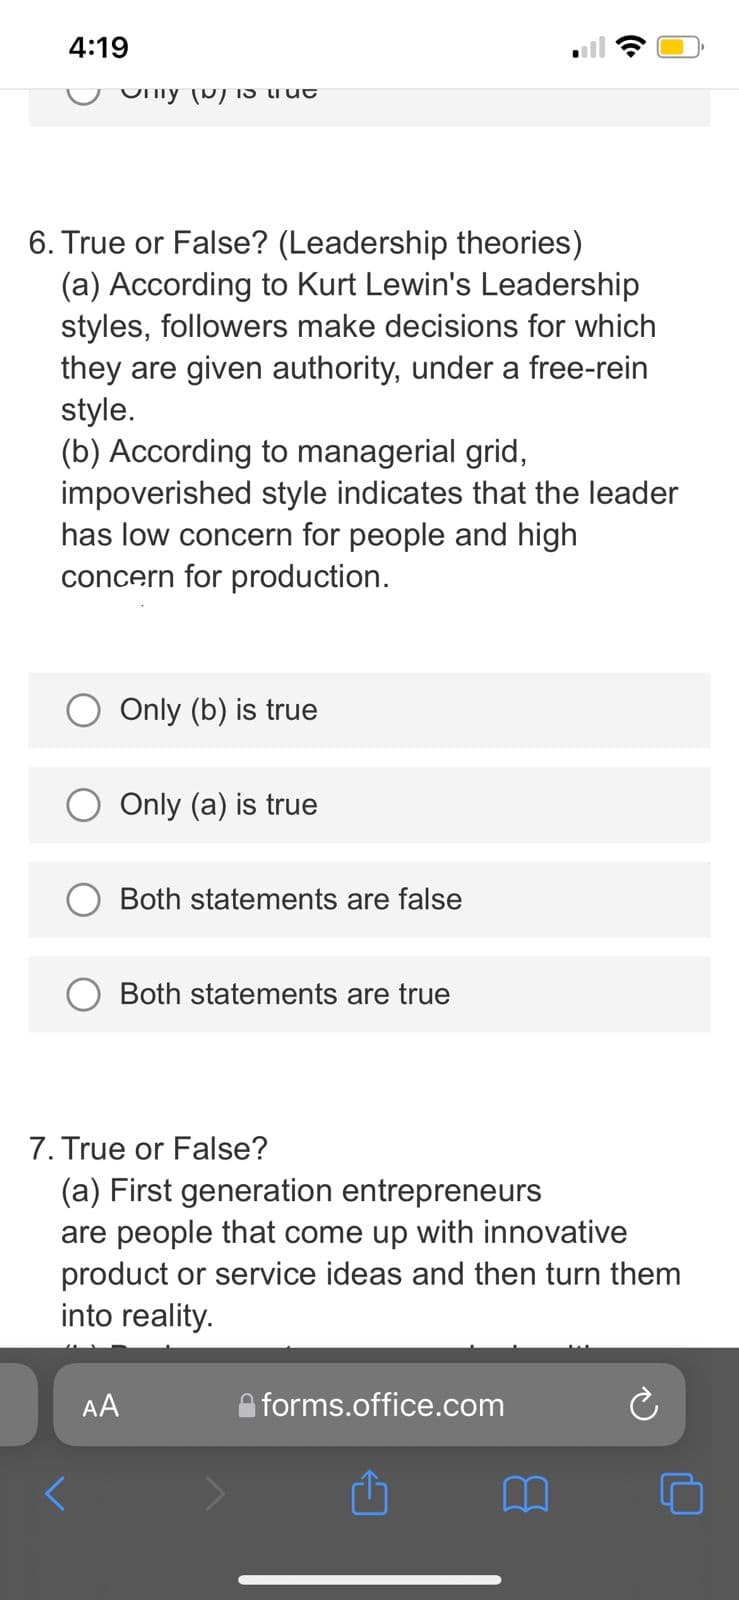 4:19
Ony (P) IS trut
6. True or False? (Leadership theories)
(a) According to Kurt Lewin's Leadership
styles, followers make decisions for which
they are given authority, under a free-rein
style.
(b) According to managerial grid,
impoverished style indicates that the leader
has low concern for people and high
concern for production.
Only (b) is true
Only (a) is true
Both statements are false
Both statements are true
7. True or False?
(a) First generation entrepreneurs
are people that come up with innovative
product or service ideas and then turn them
into reality.
AA
forms.office.com
